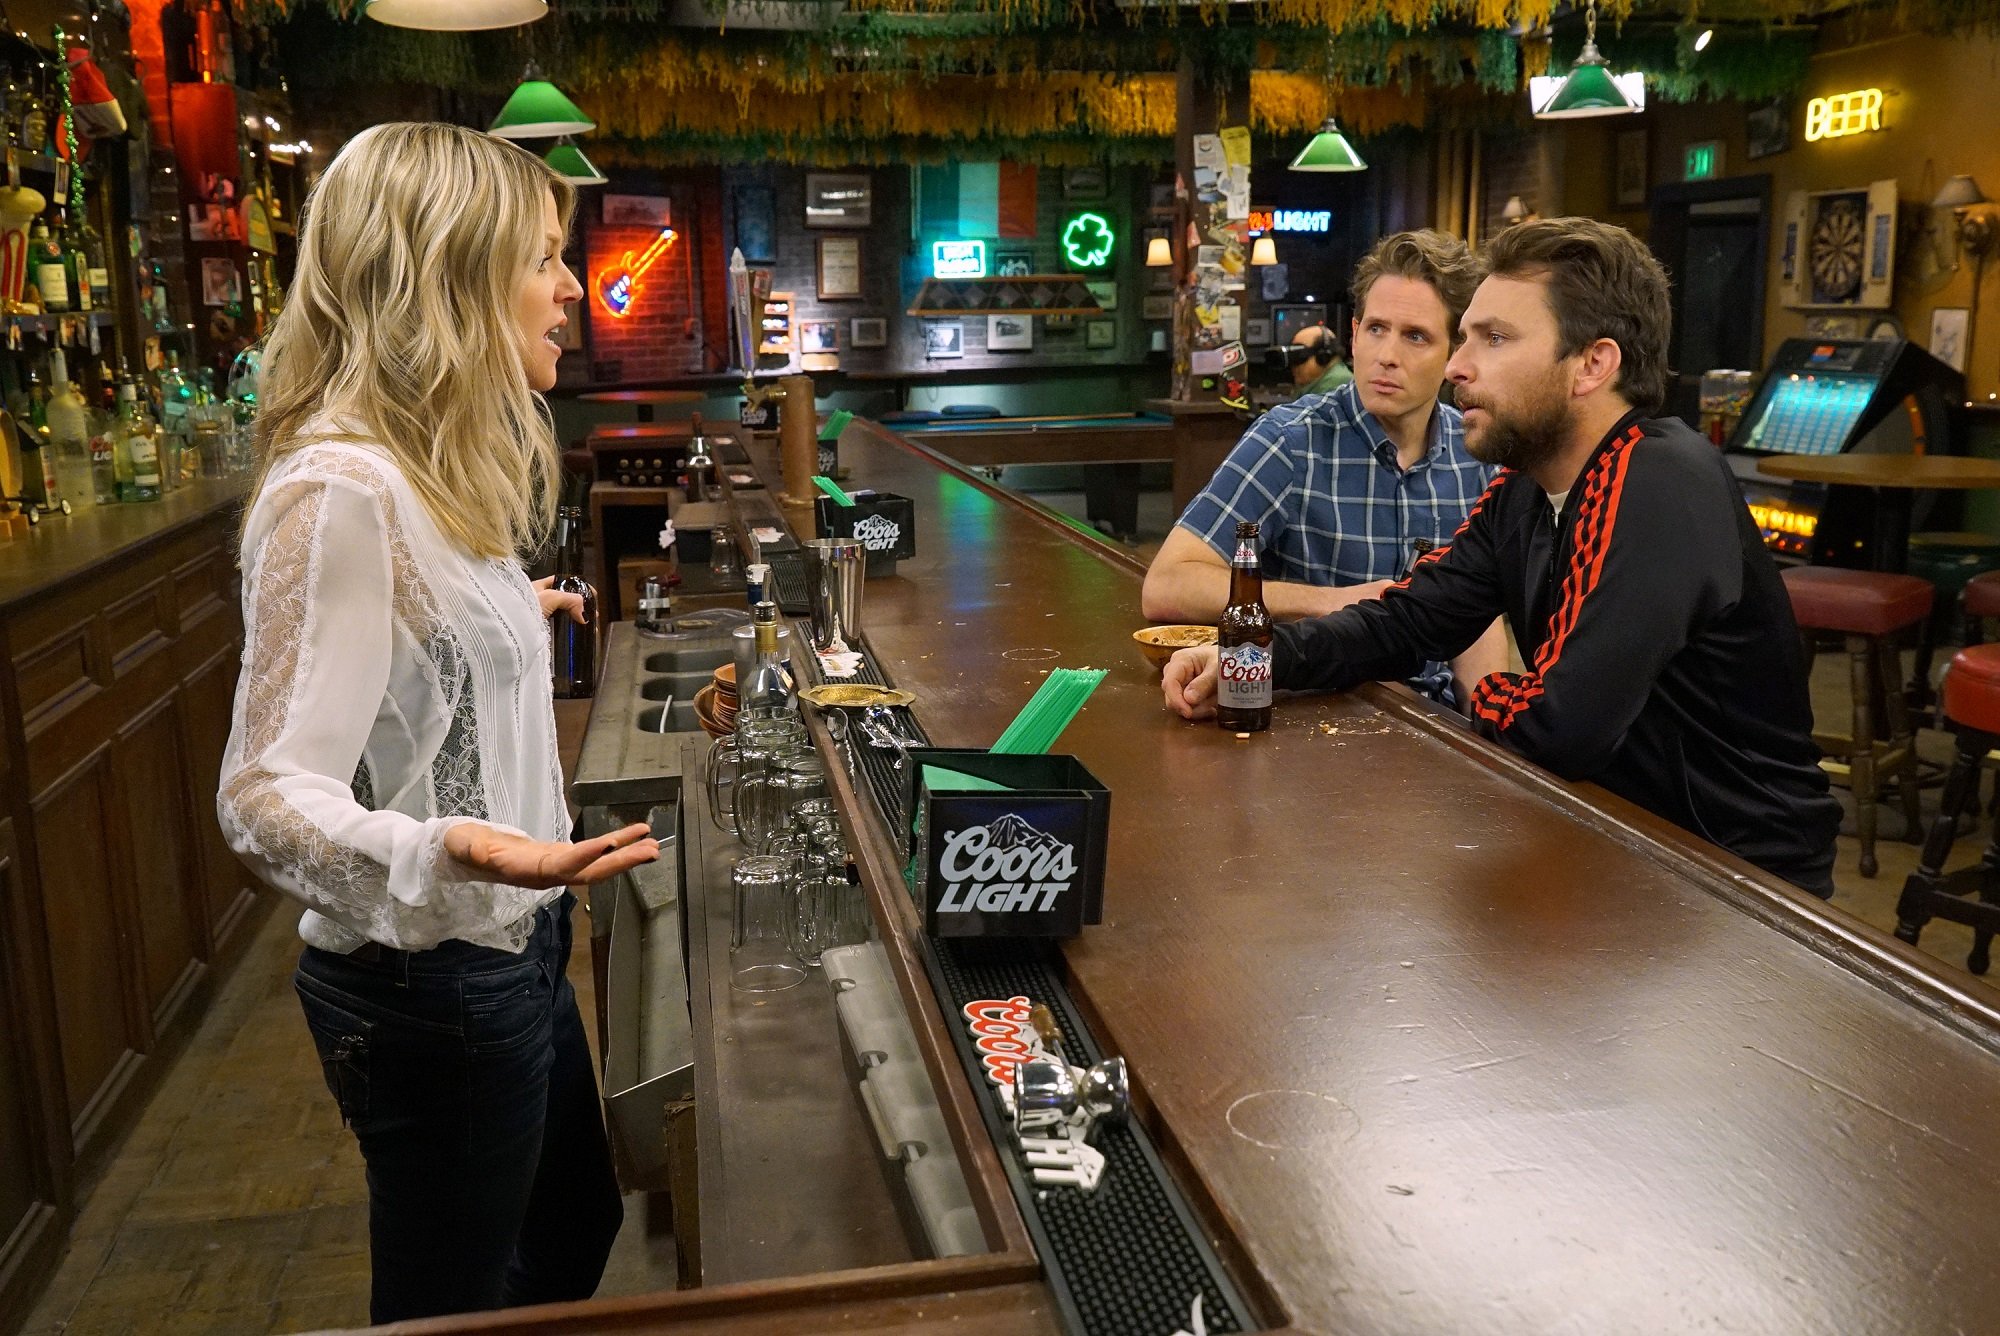 It's Always Sunny in Philadelphia: Dee, Dennis and Charlie in Paddy's